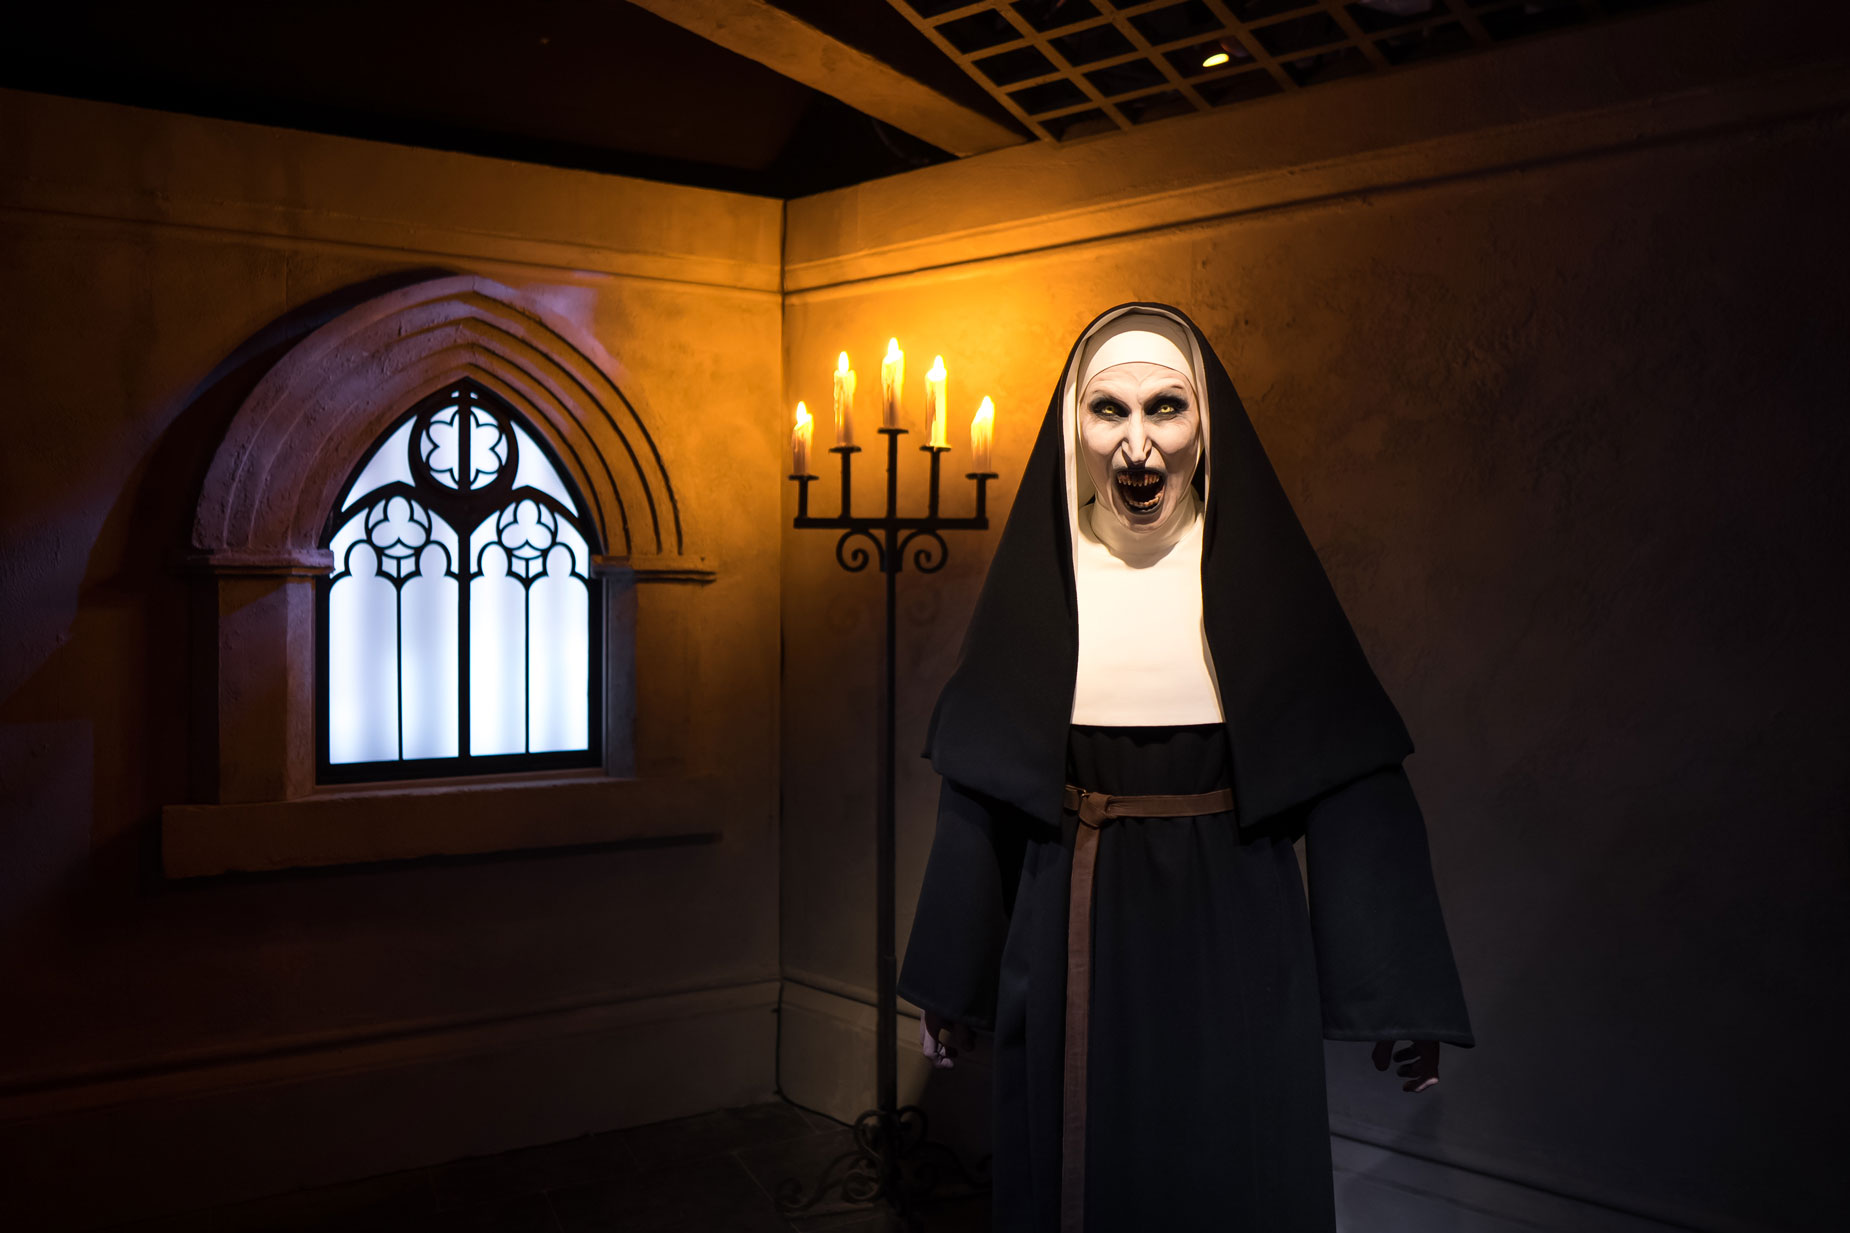 The Nun at Warner Bros. Icons of Horror